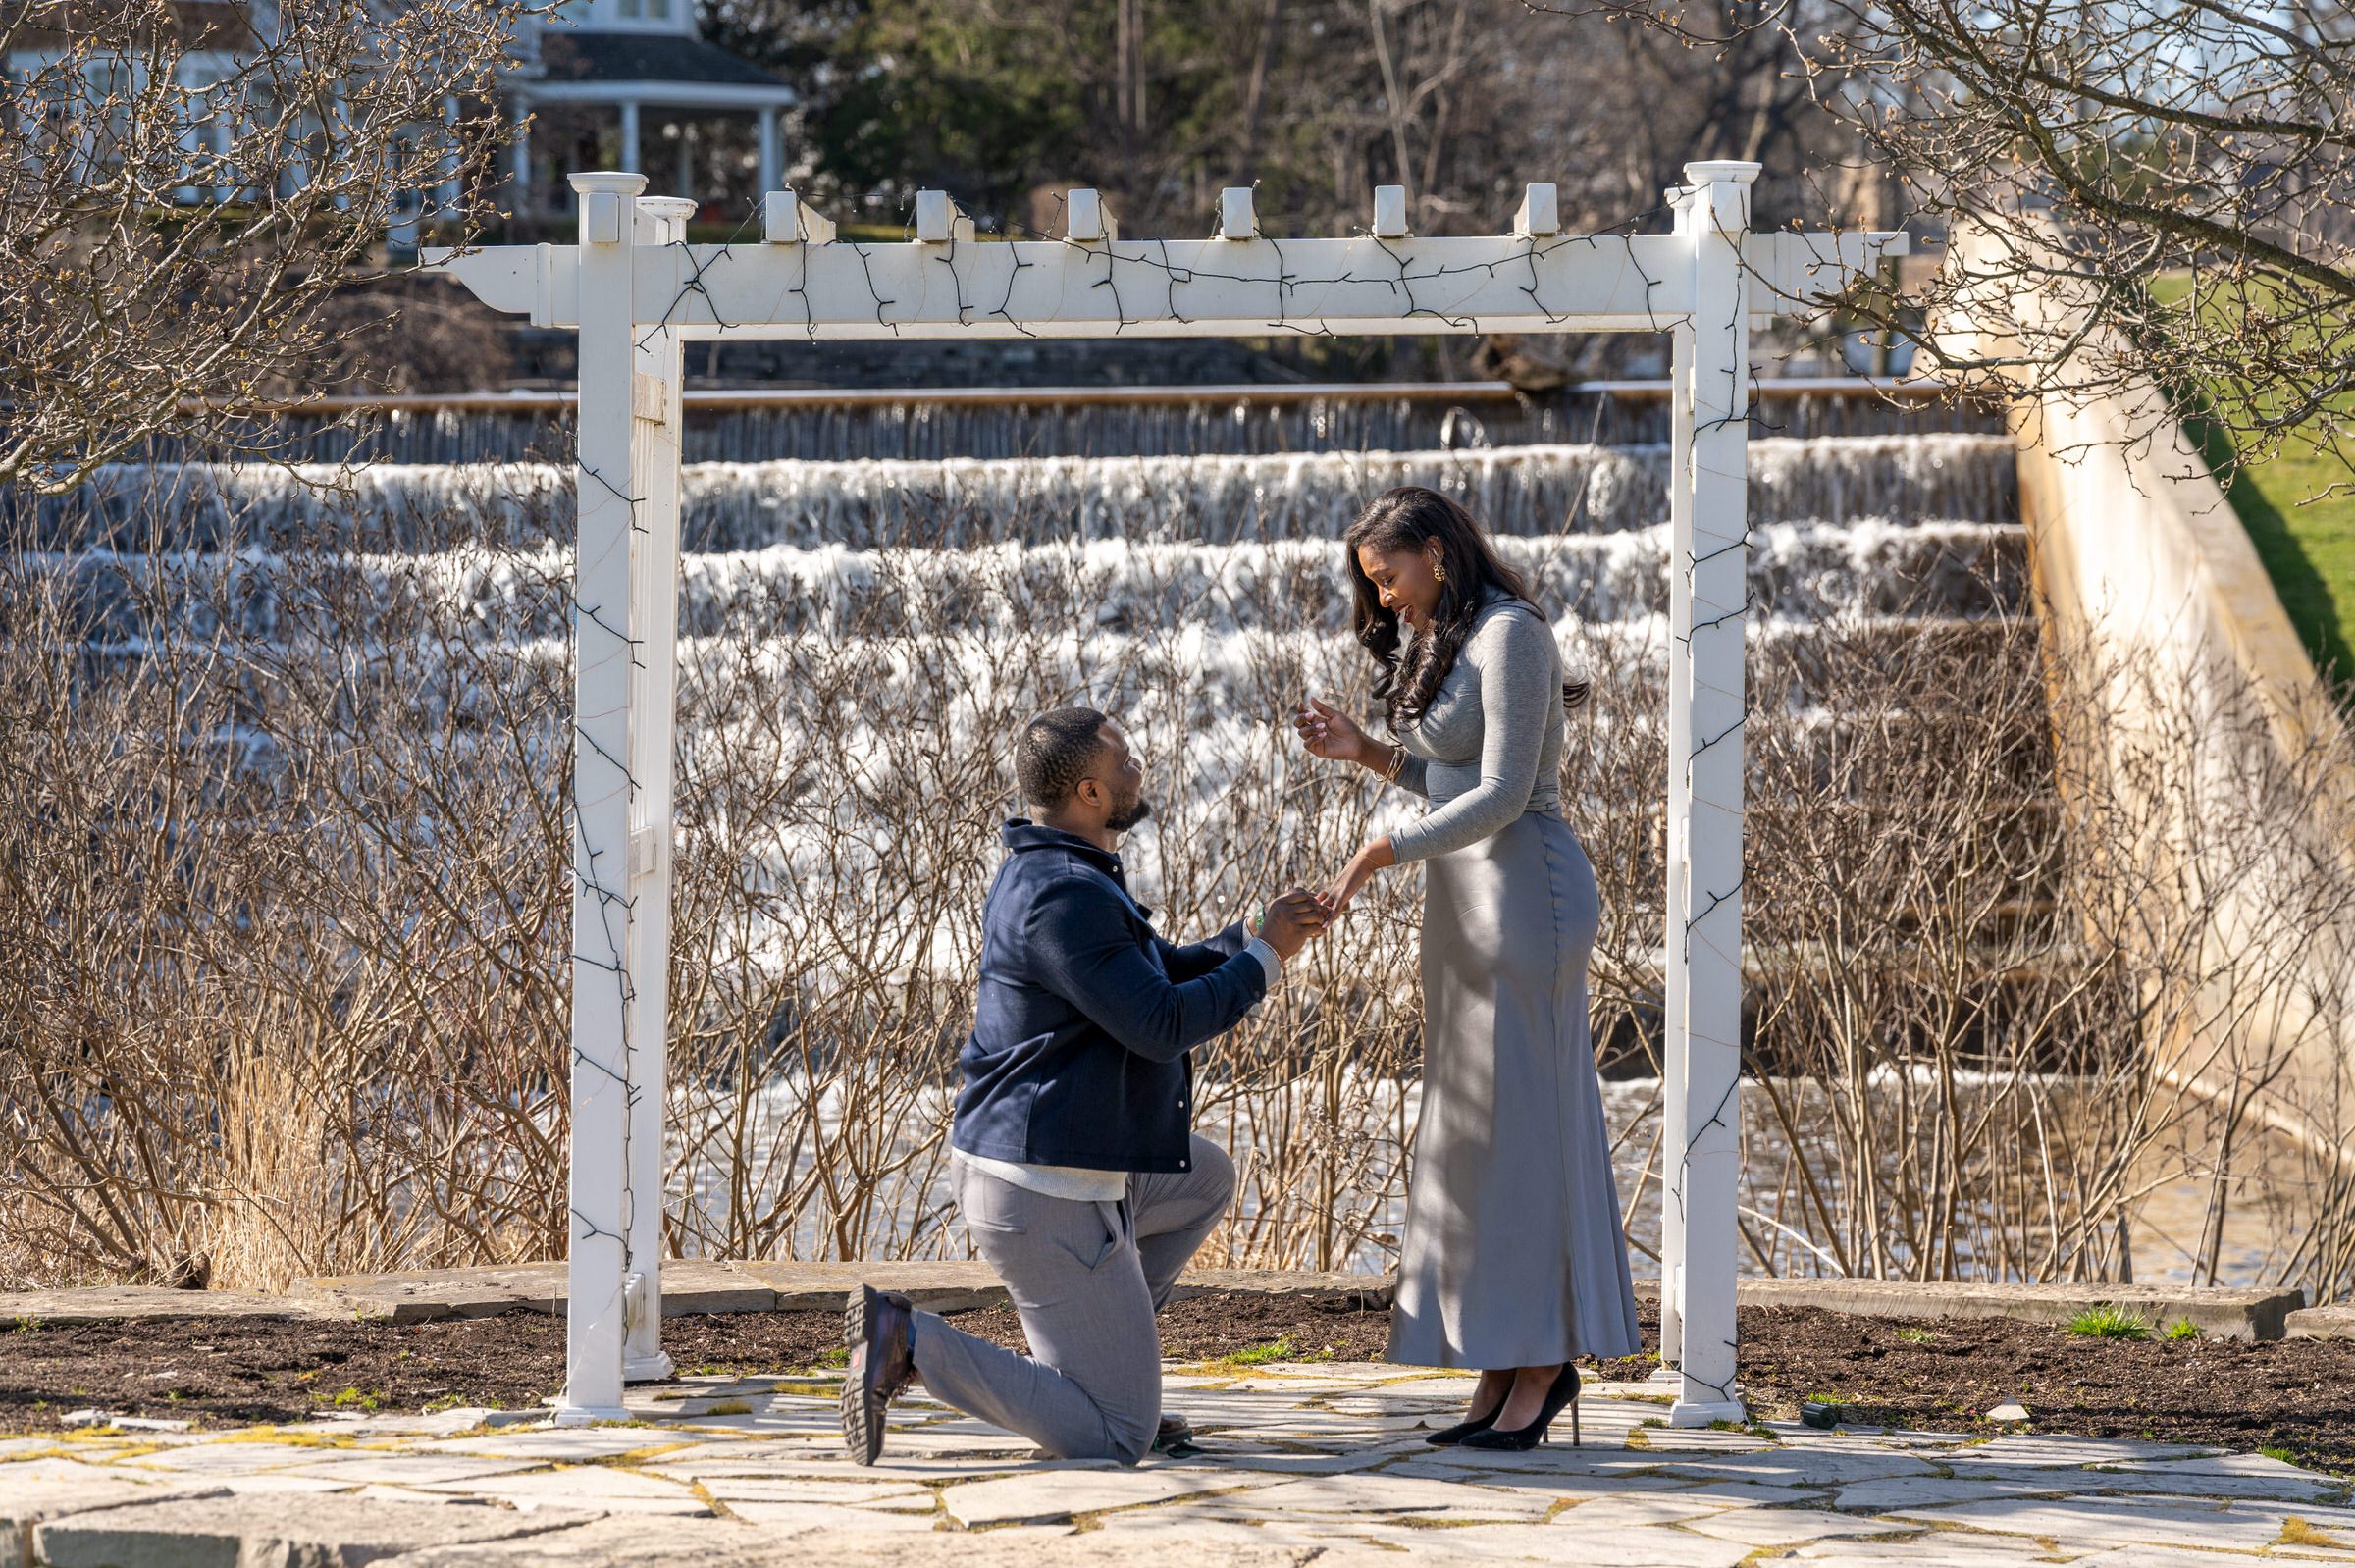 A fiancee asks for his girlfriend's hand in marriage at a proposal at Quarton Lake pergola.  